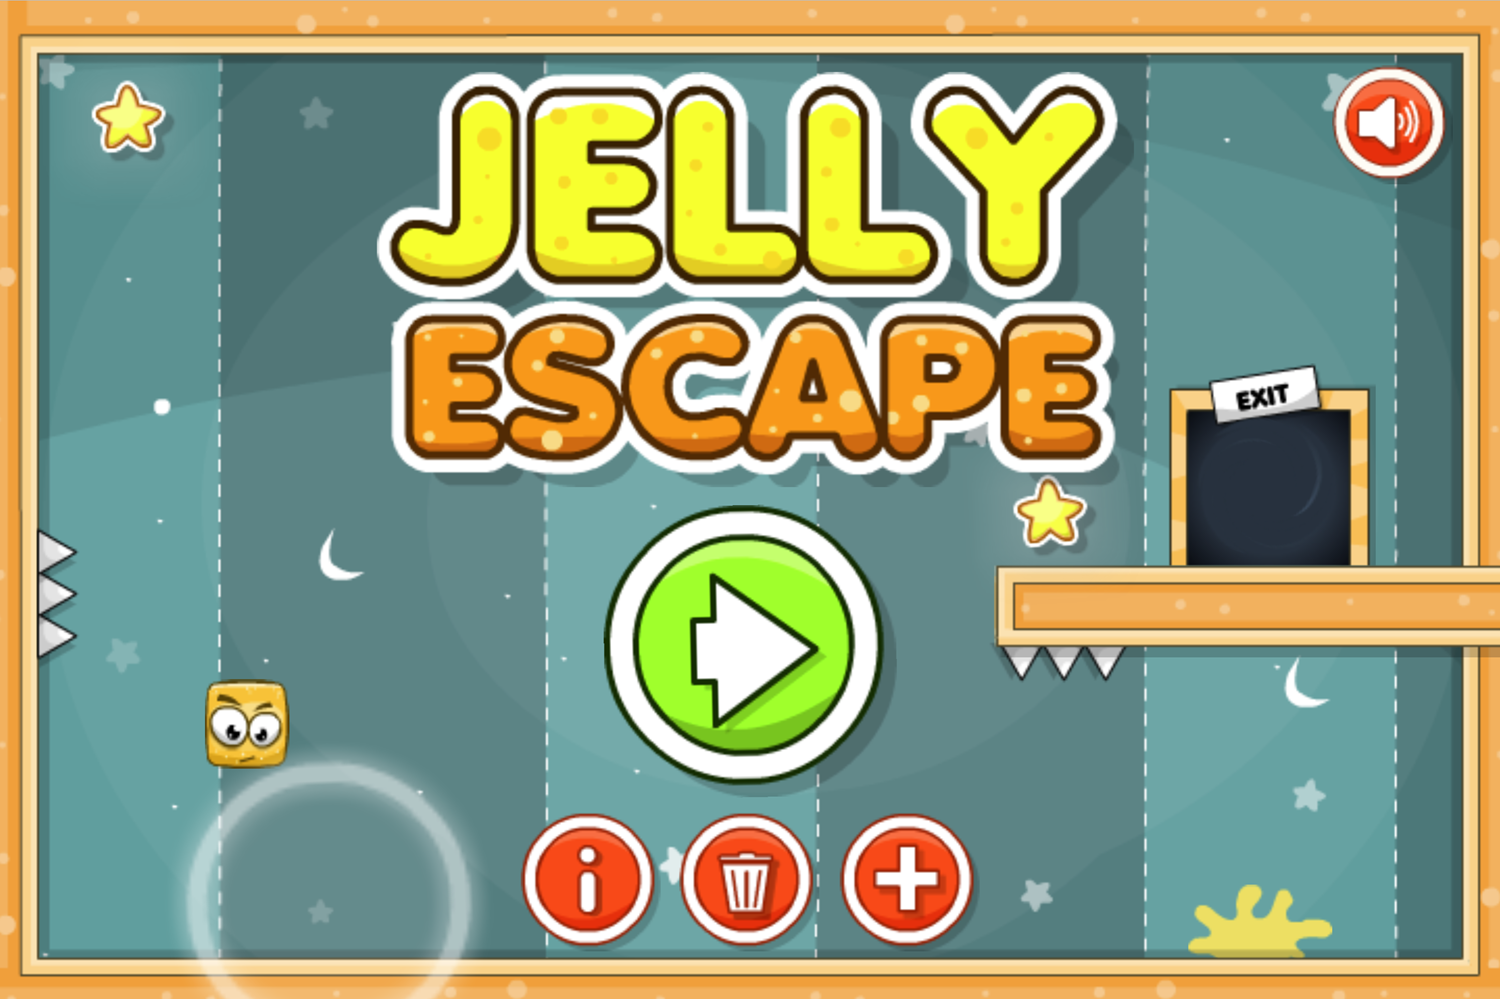 Jelly Escape Game Welcome Screen Screenshot.